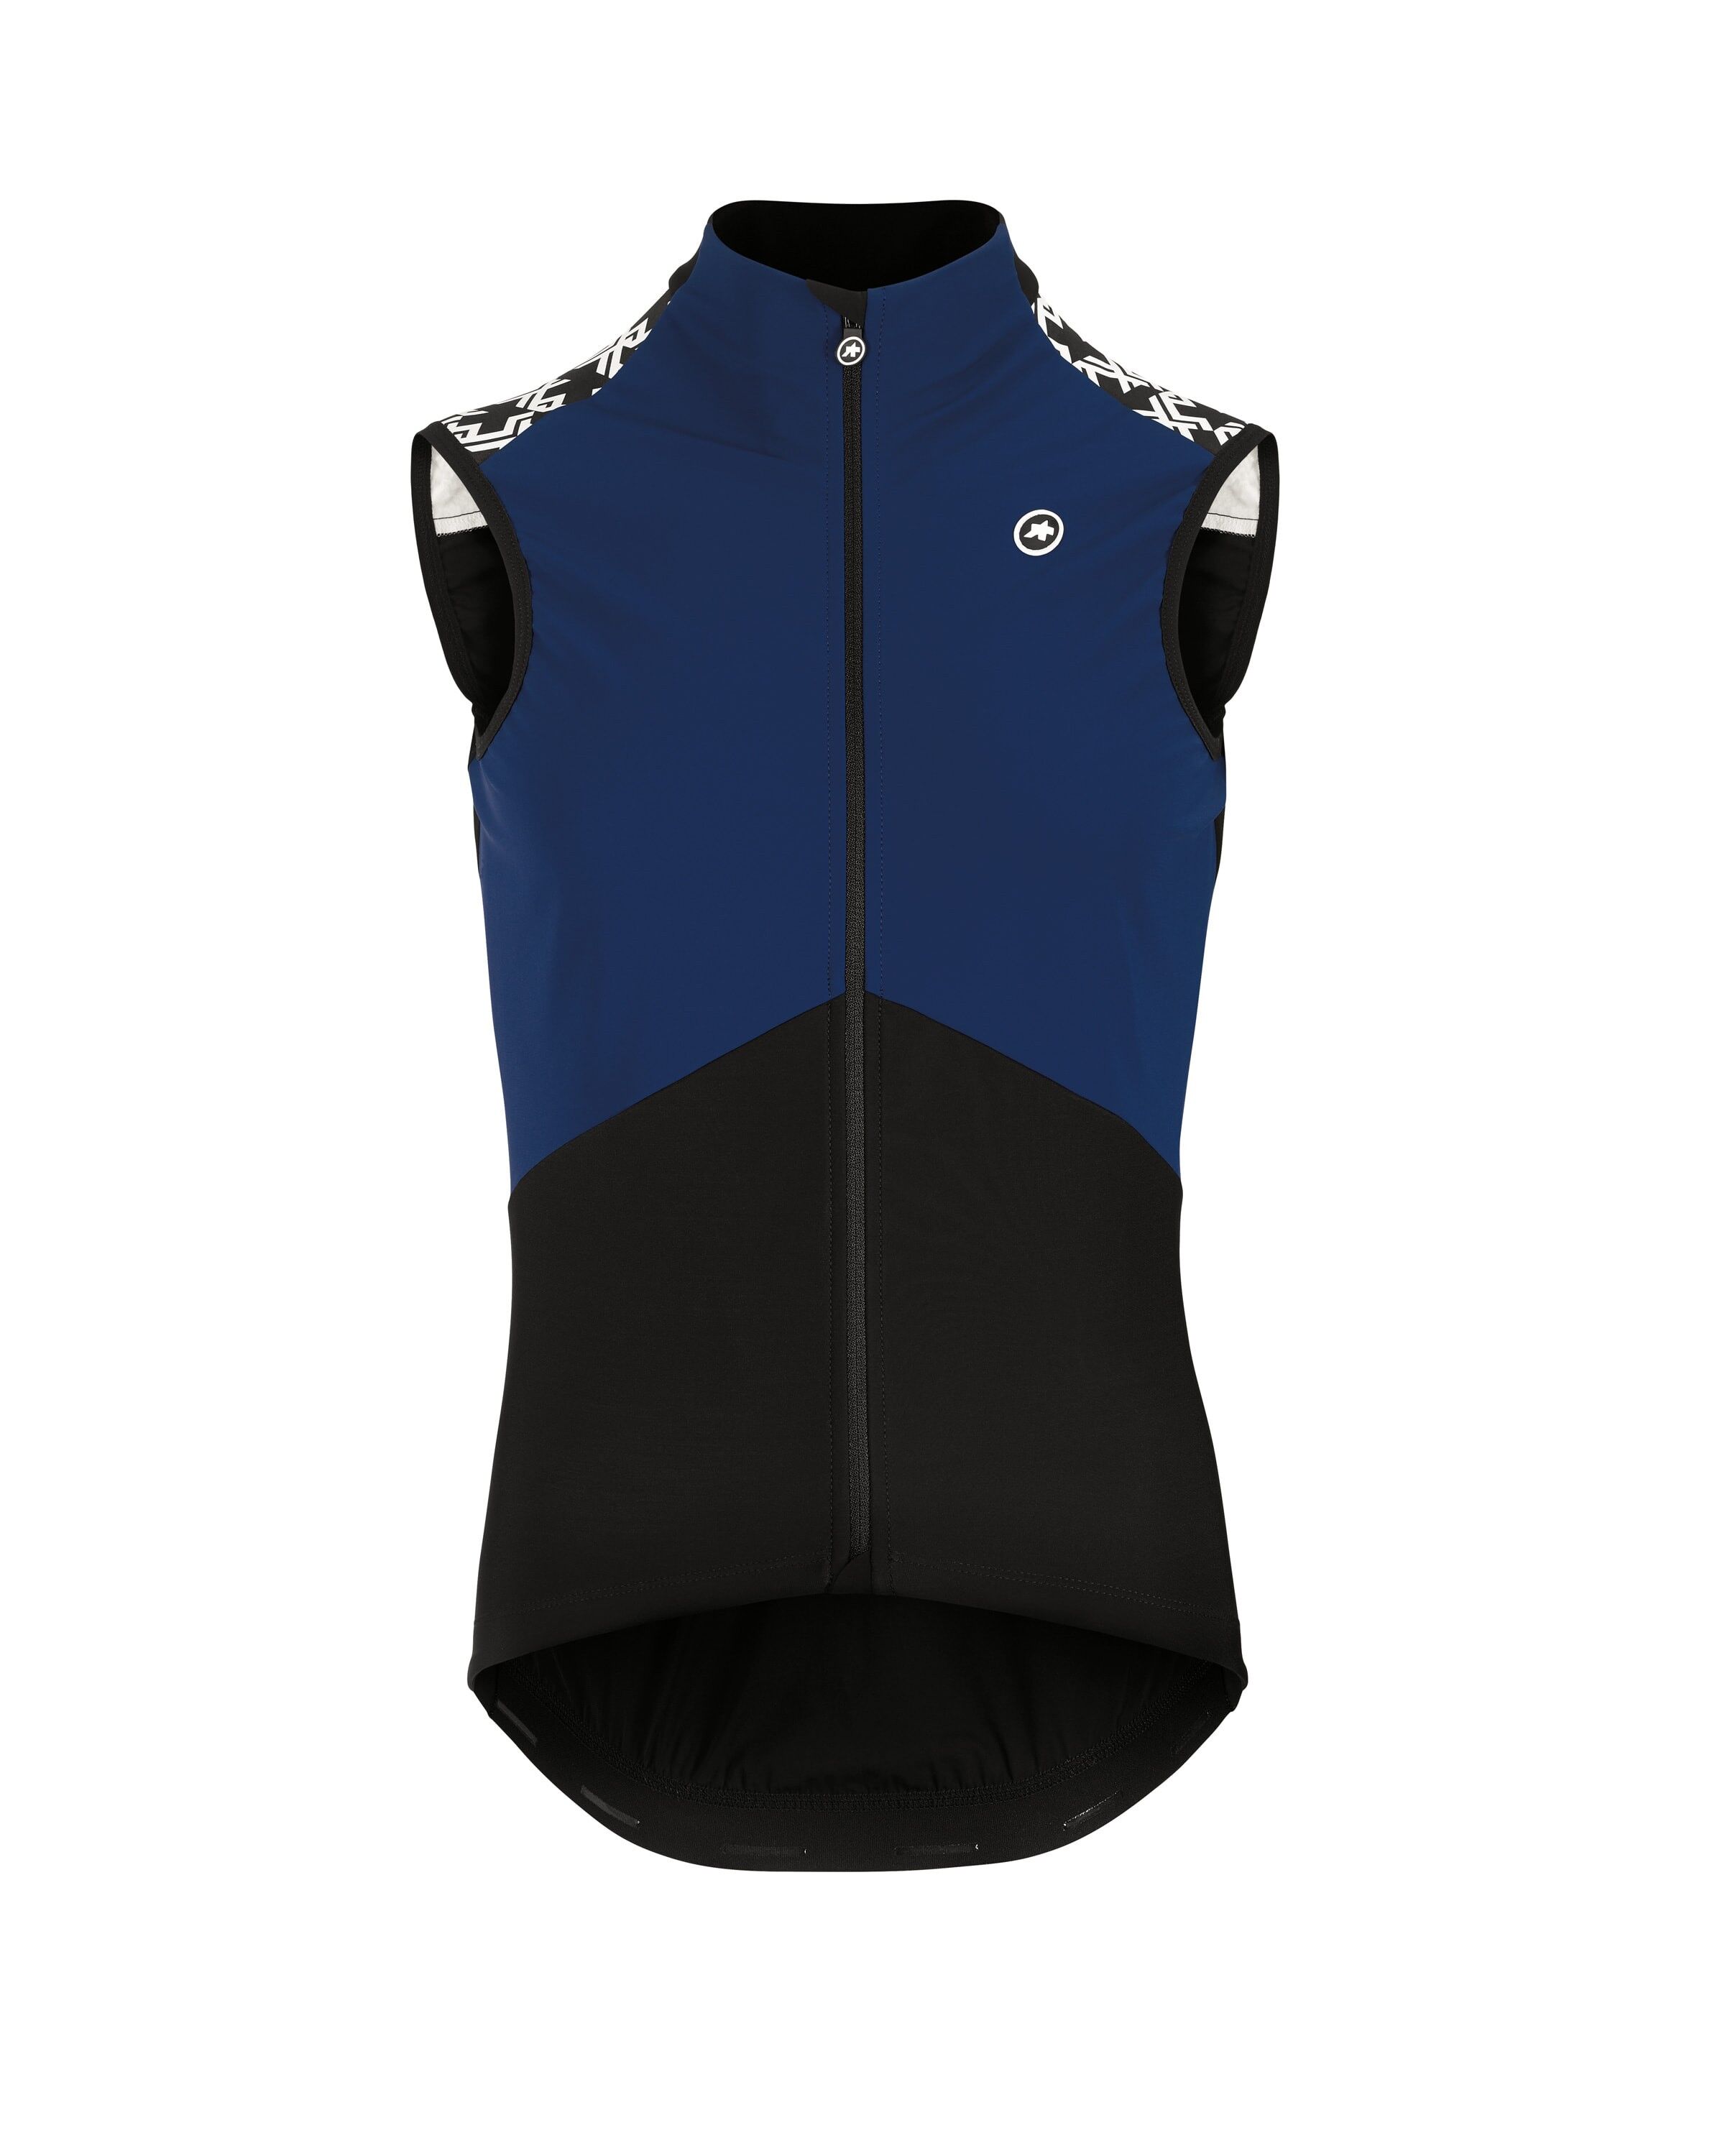 Assos Mille GT Spring Fall Airblock Vest - Cycling windproof jacket - Men's